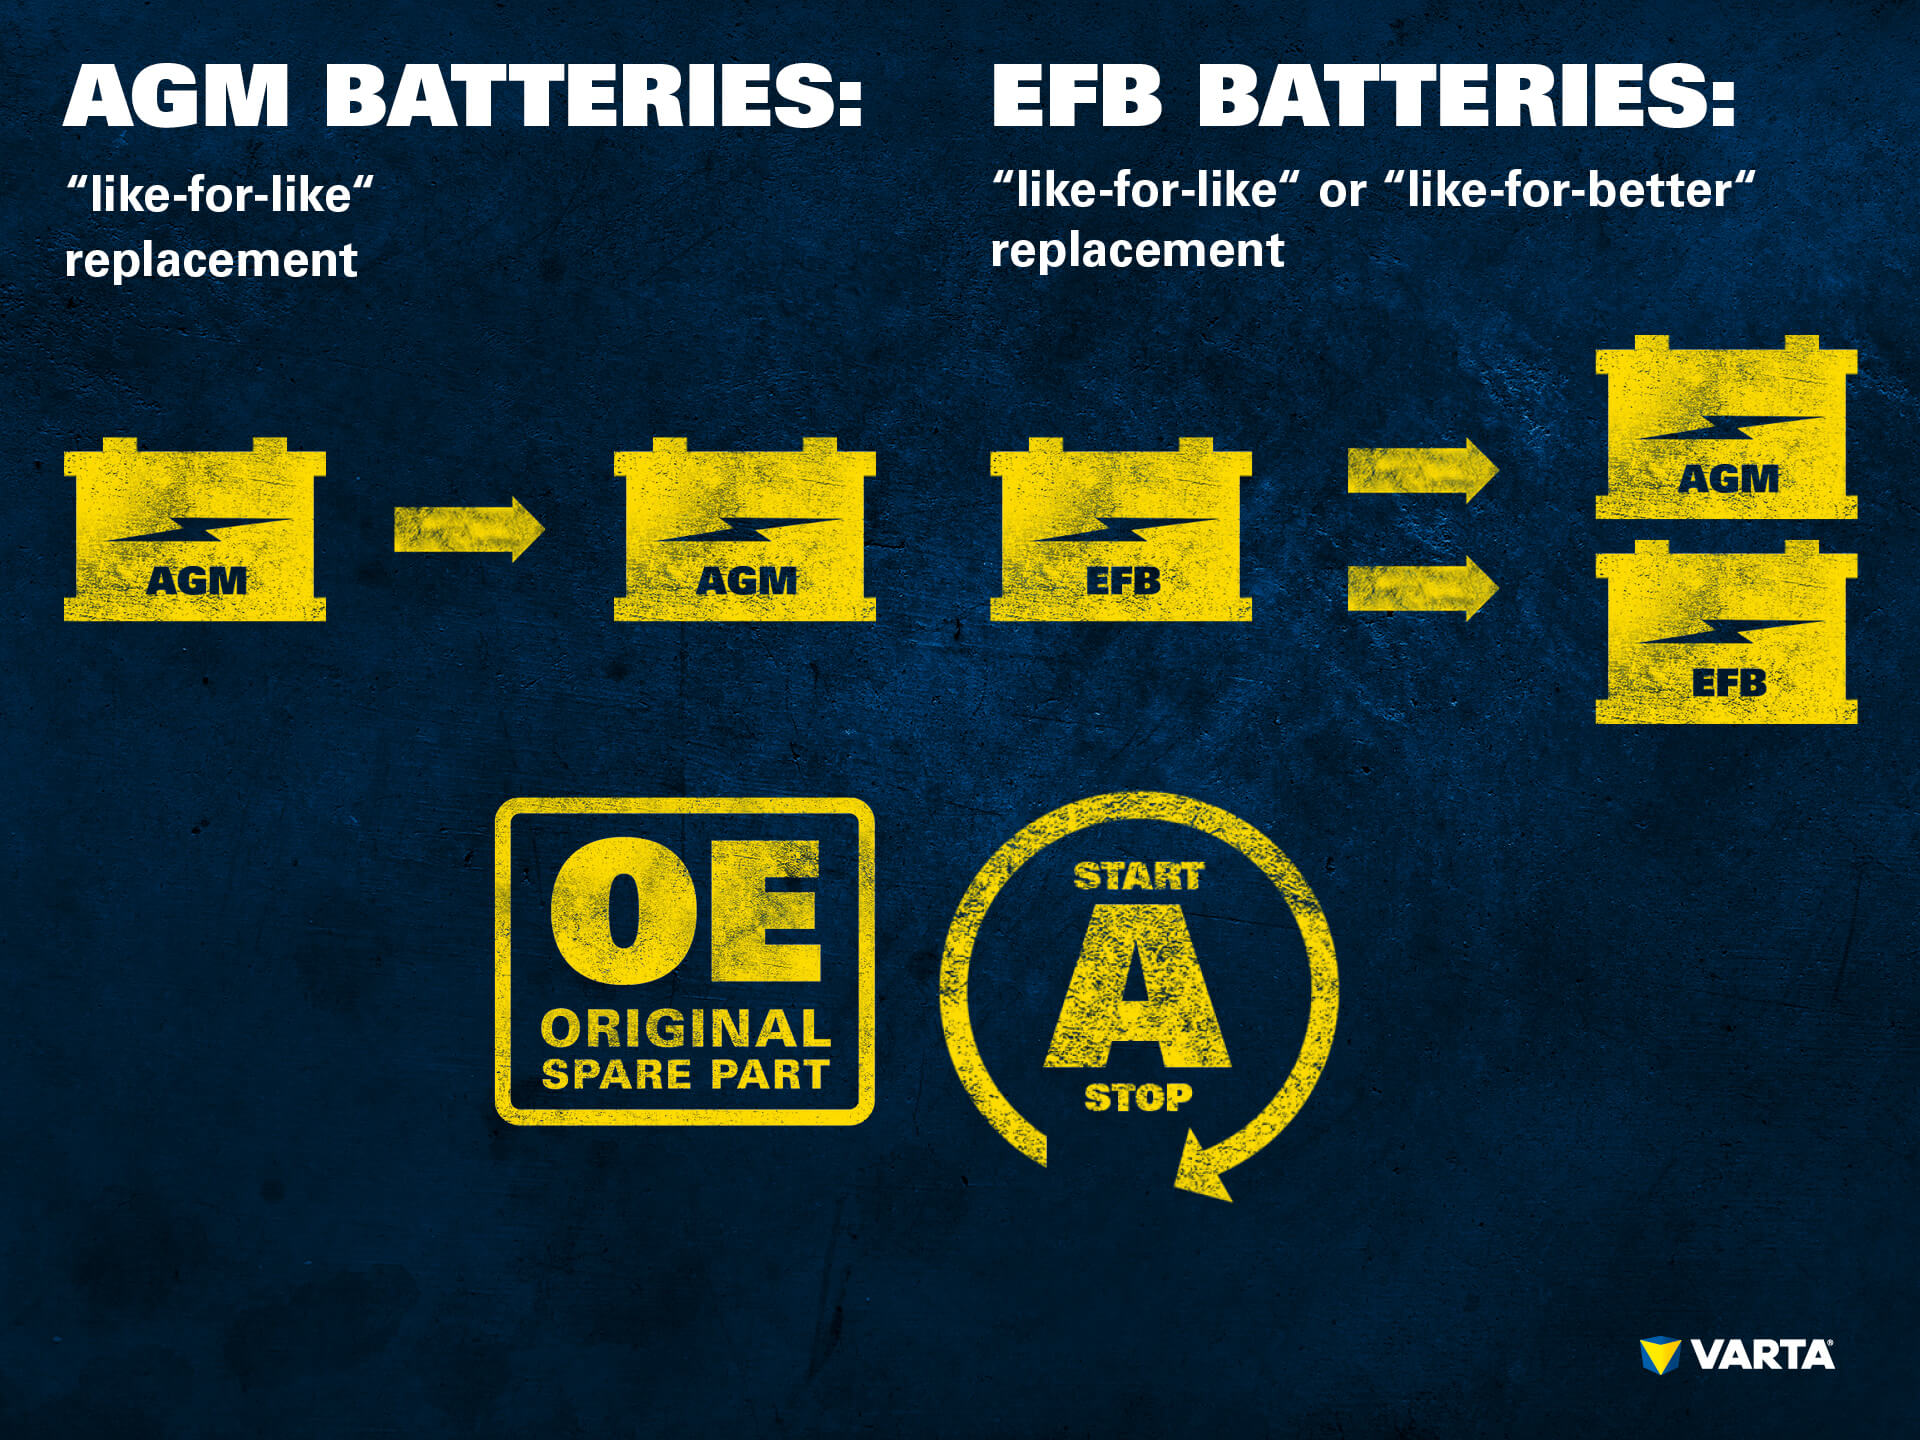 Which is the best replacement battery for automatic start-stop systems?